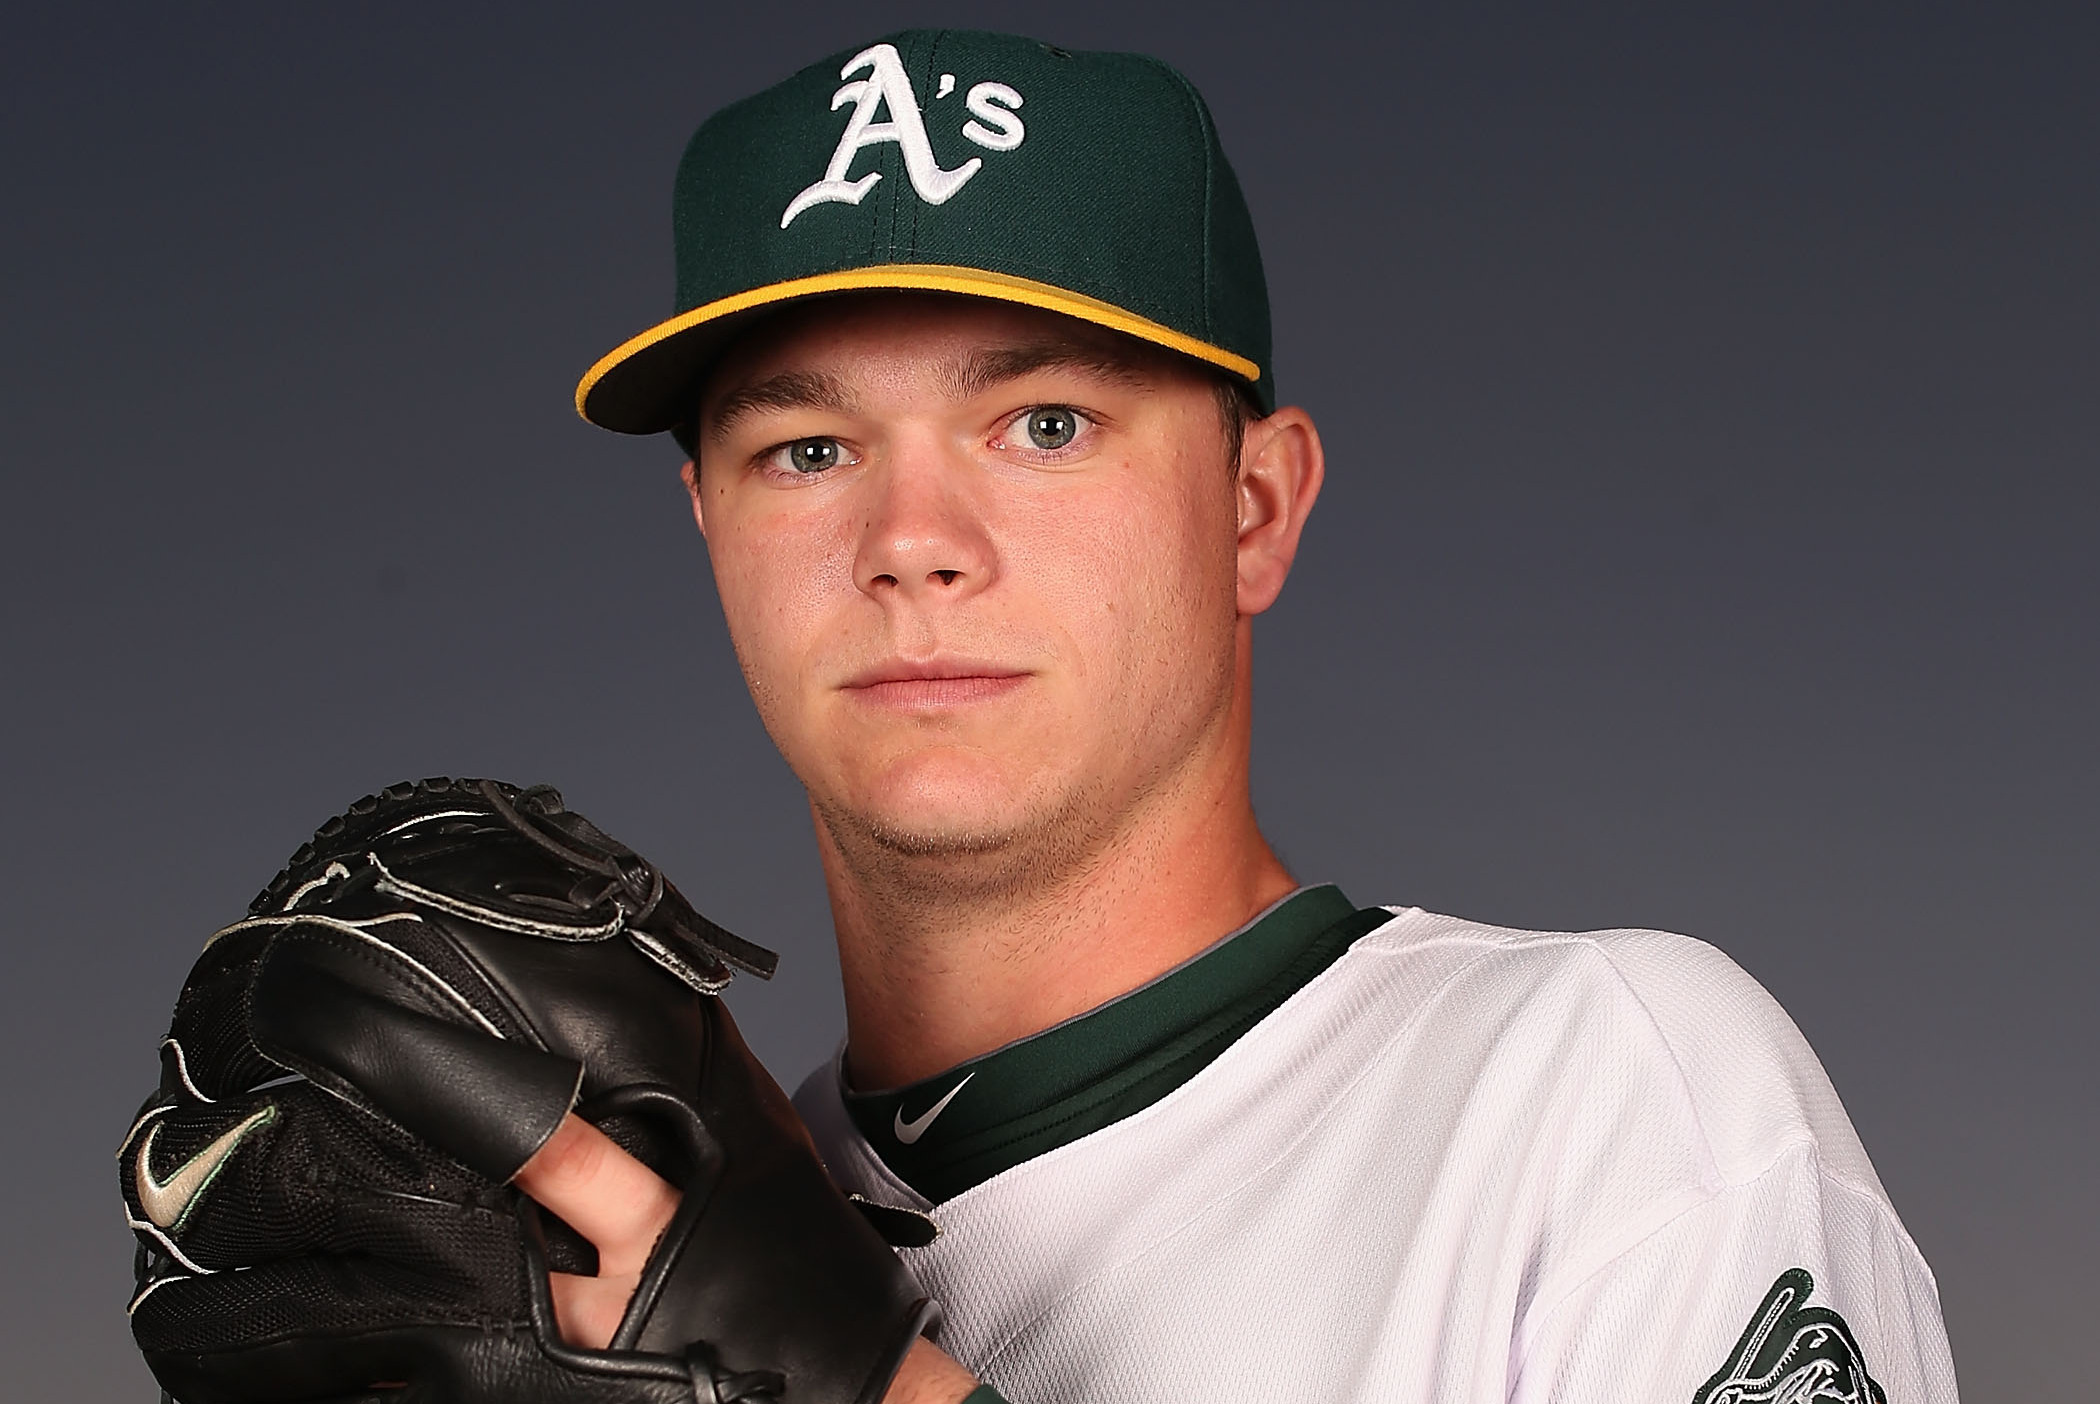 Sonny Gray struggles in Athletics' loss to the Mariners